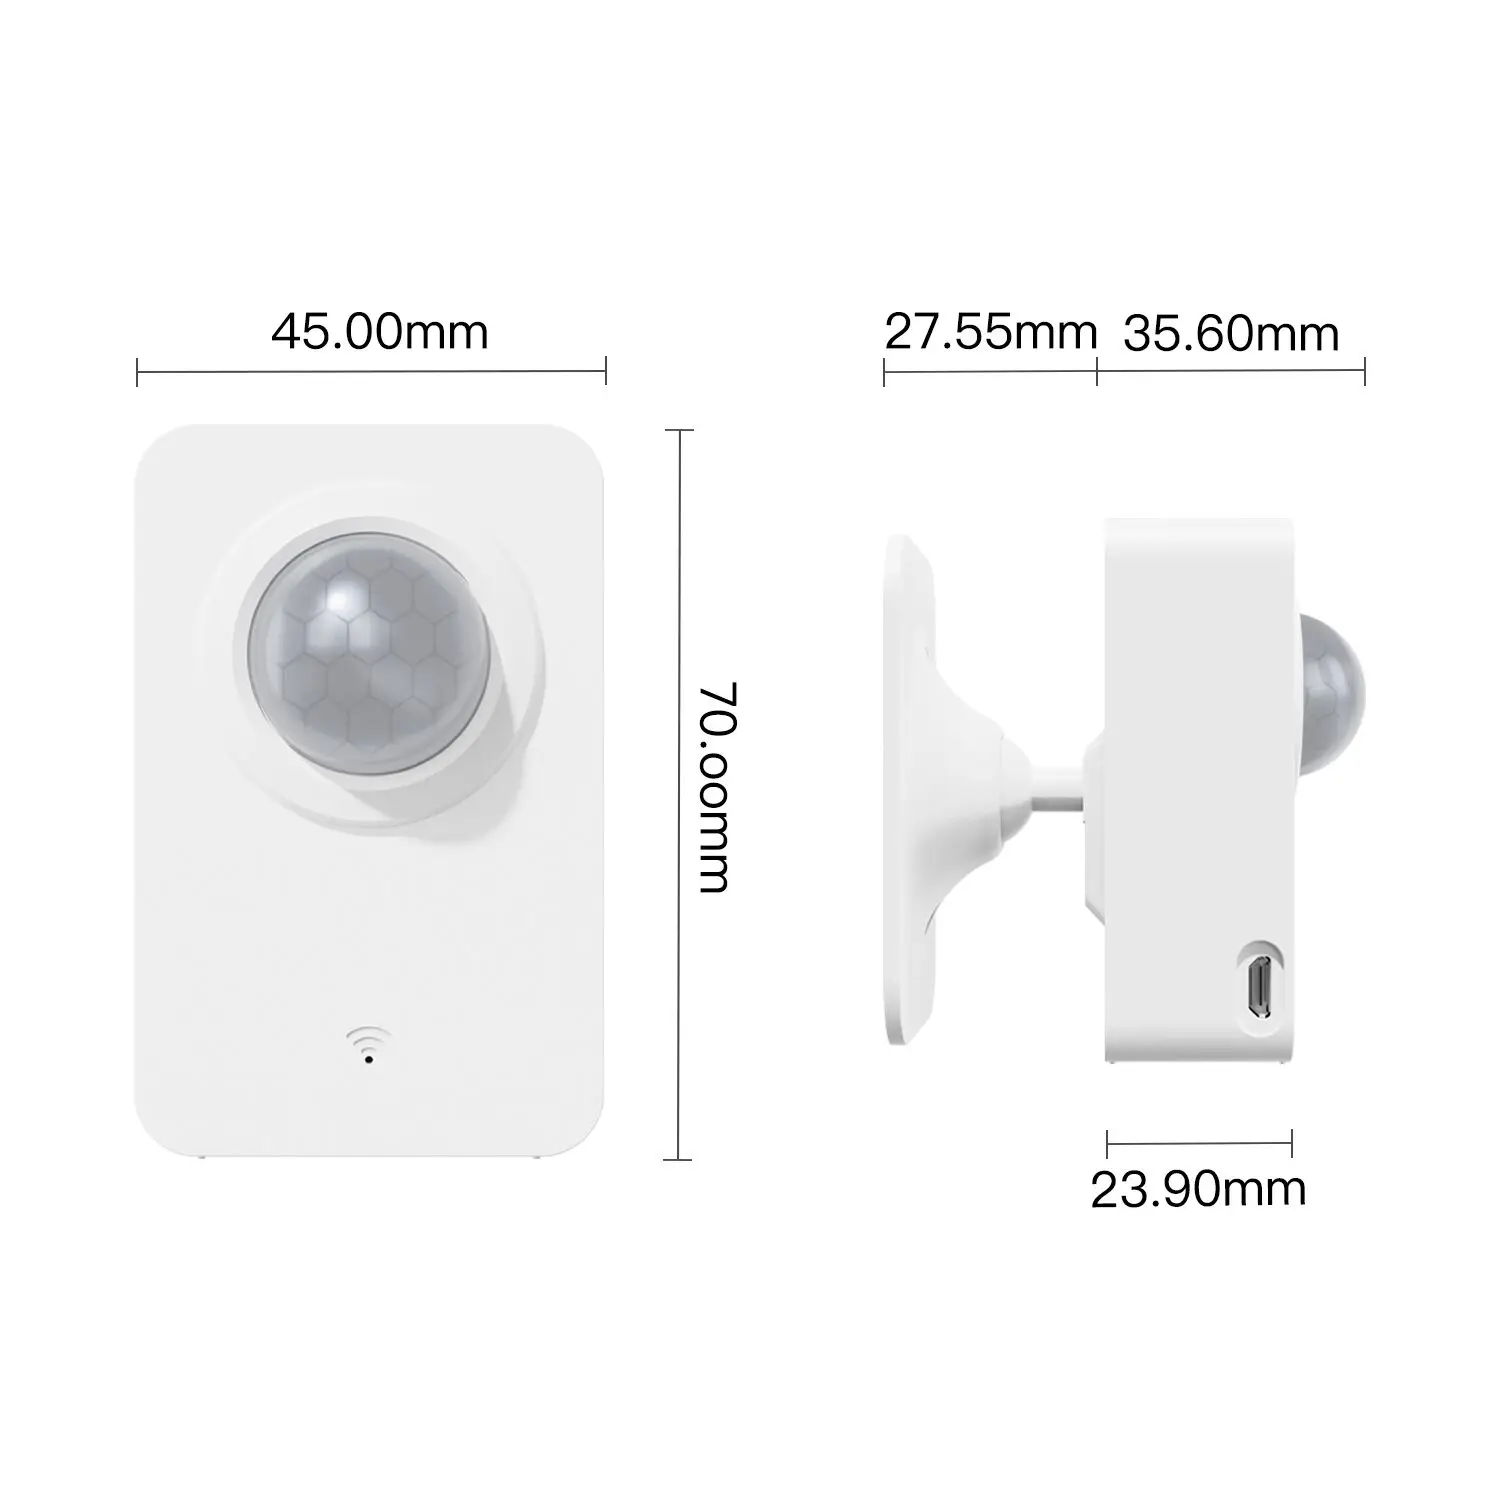 

Wireless On Wall Ceiling mounted Zigbee PIR Motion Sensors, Movement Detector for Home Alarm System,zigbee pir motion sensor